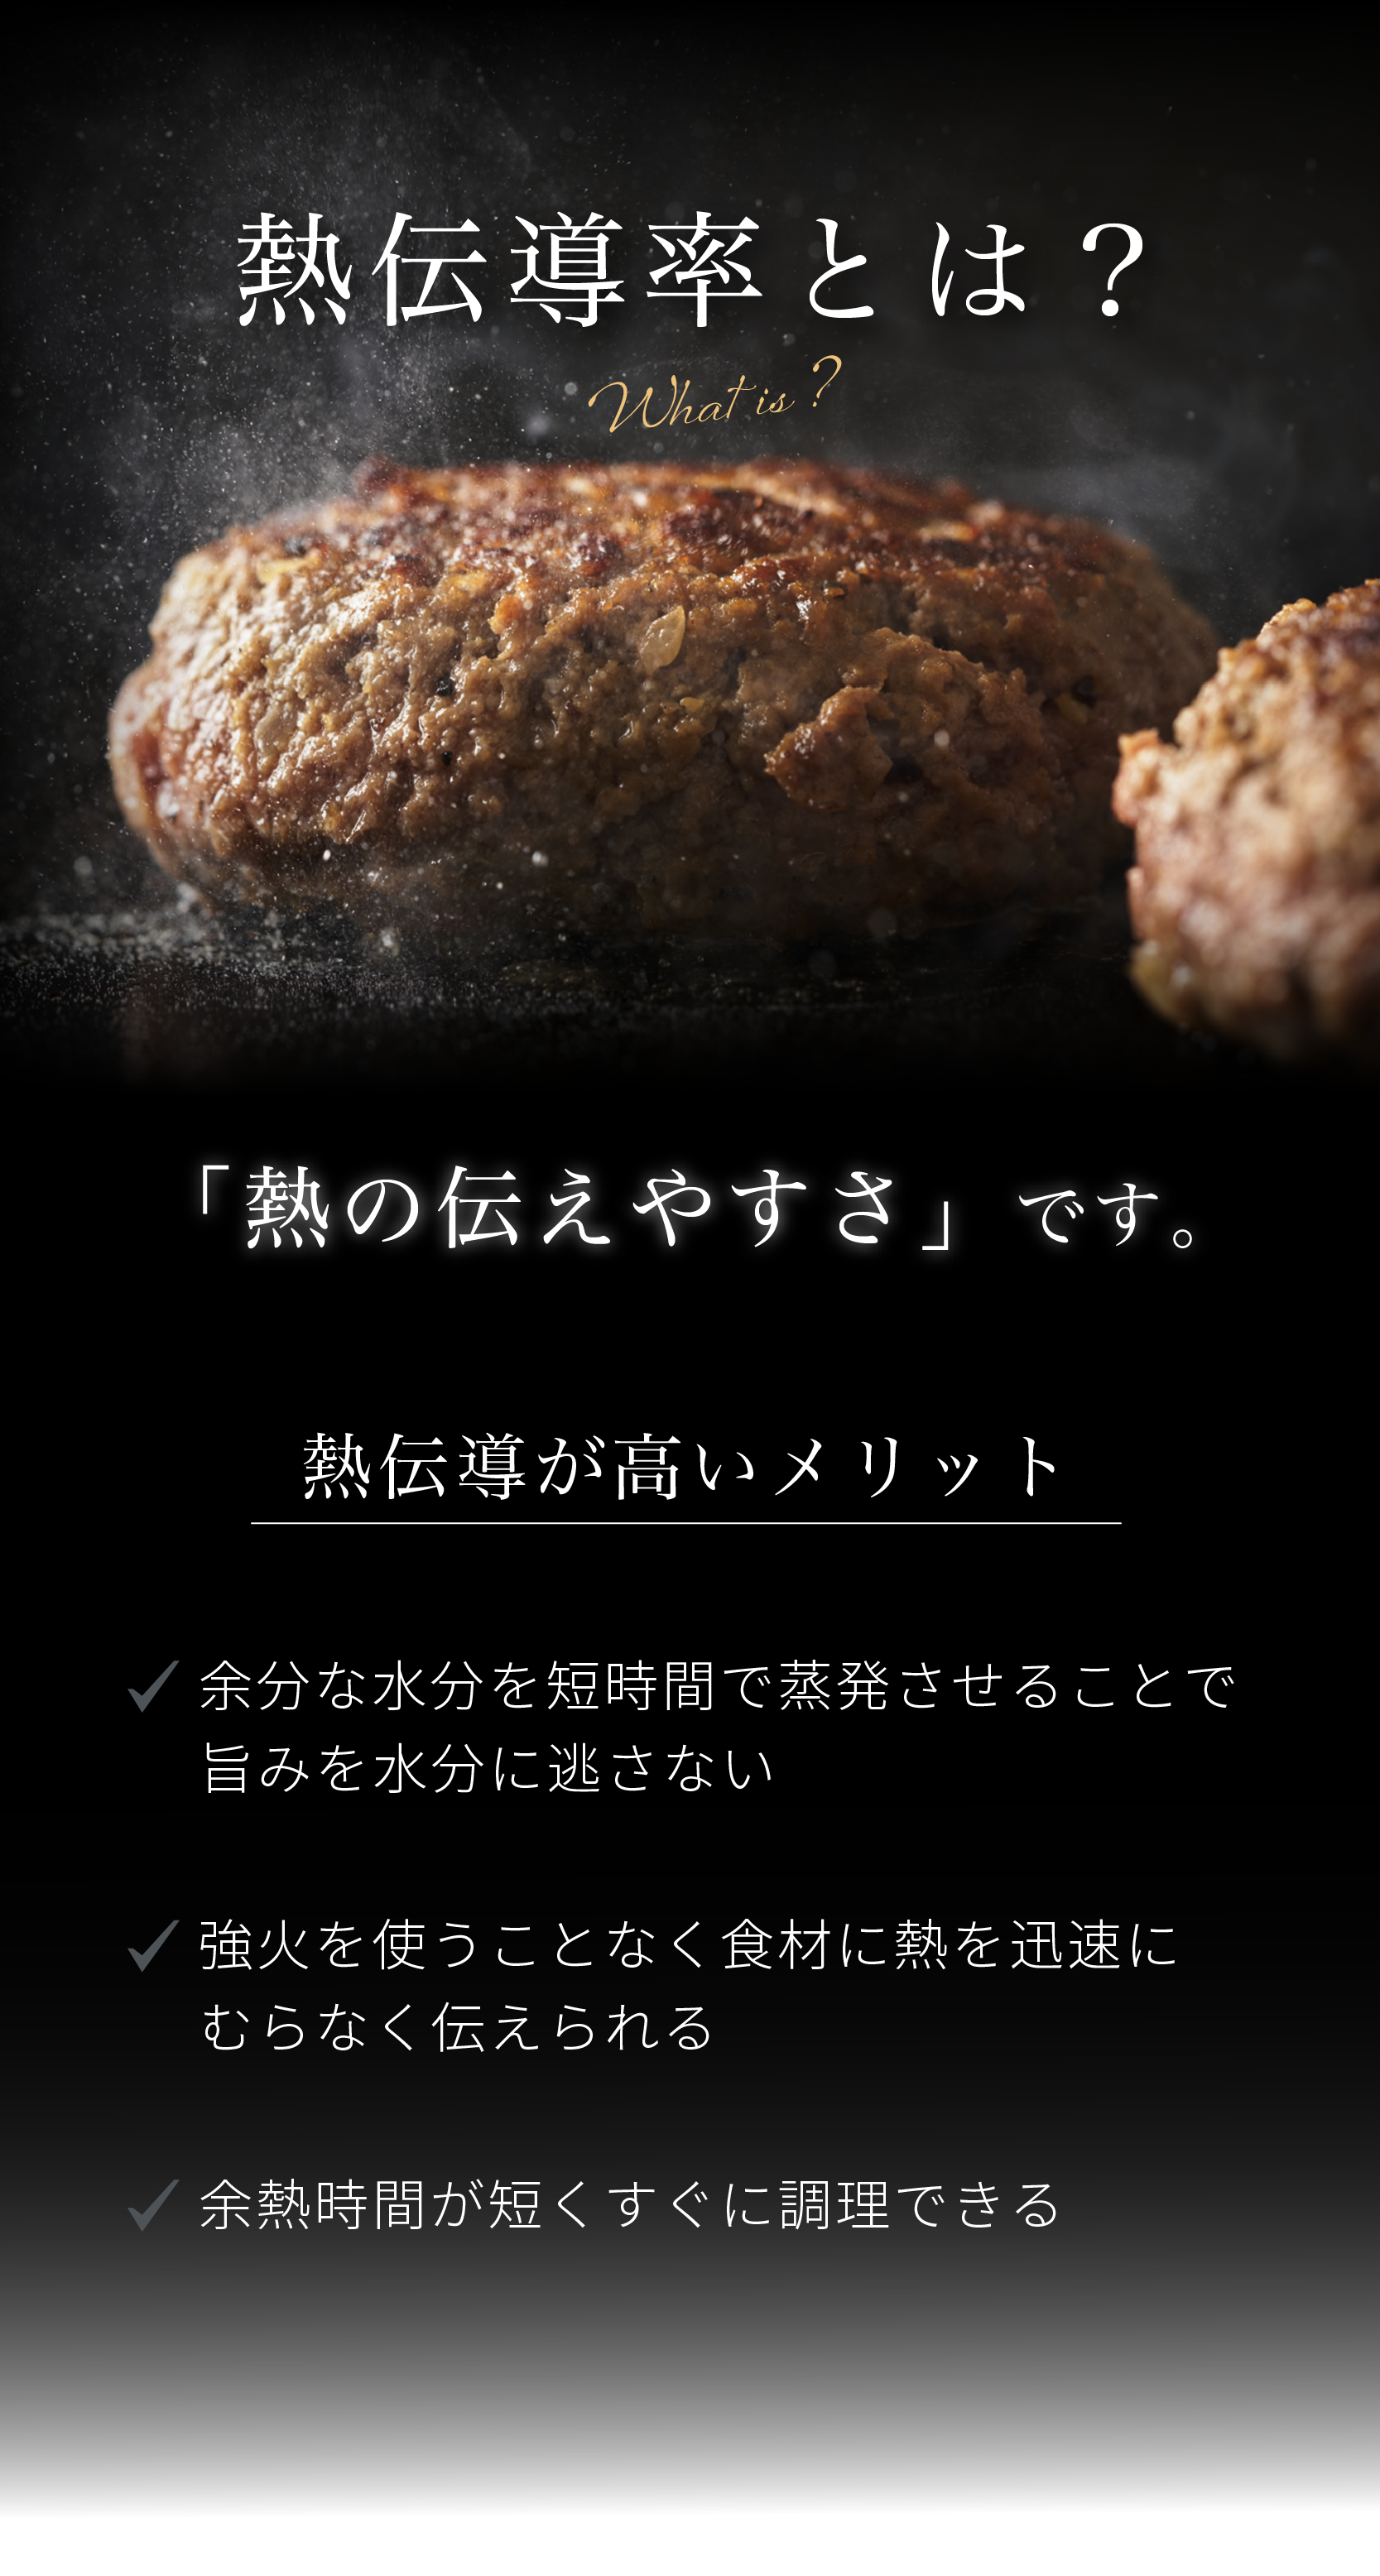 5Star Gourmet Store構成.png__PID:2753741a-1f0f-4685-b675-152abe375a54